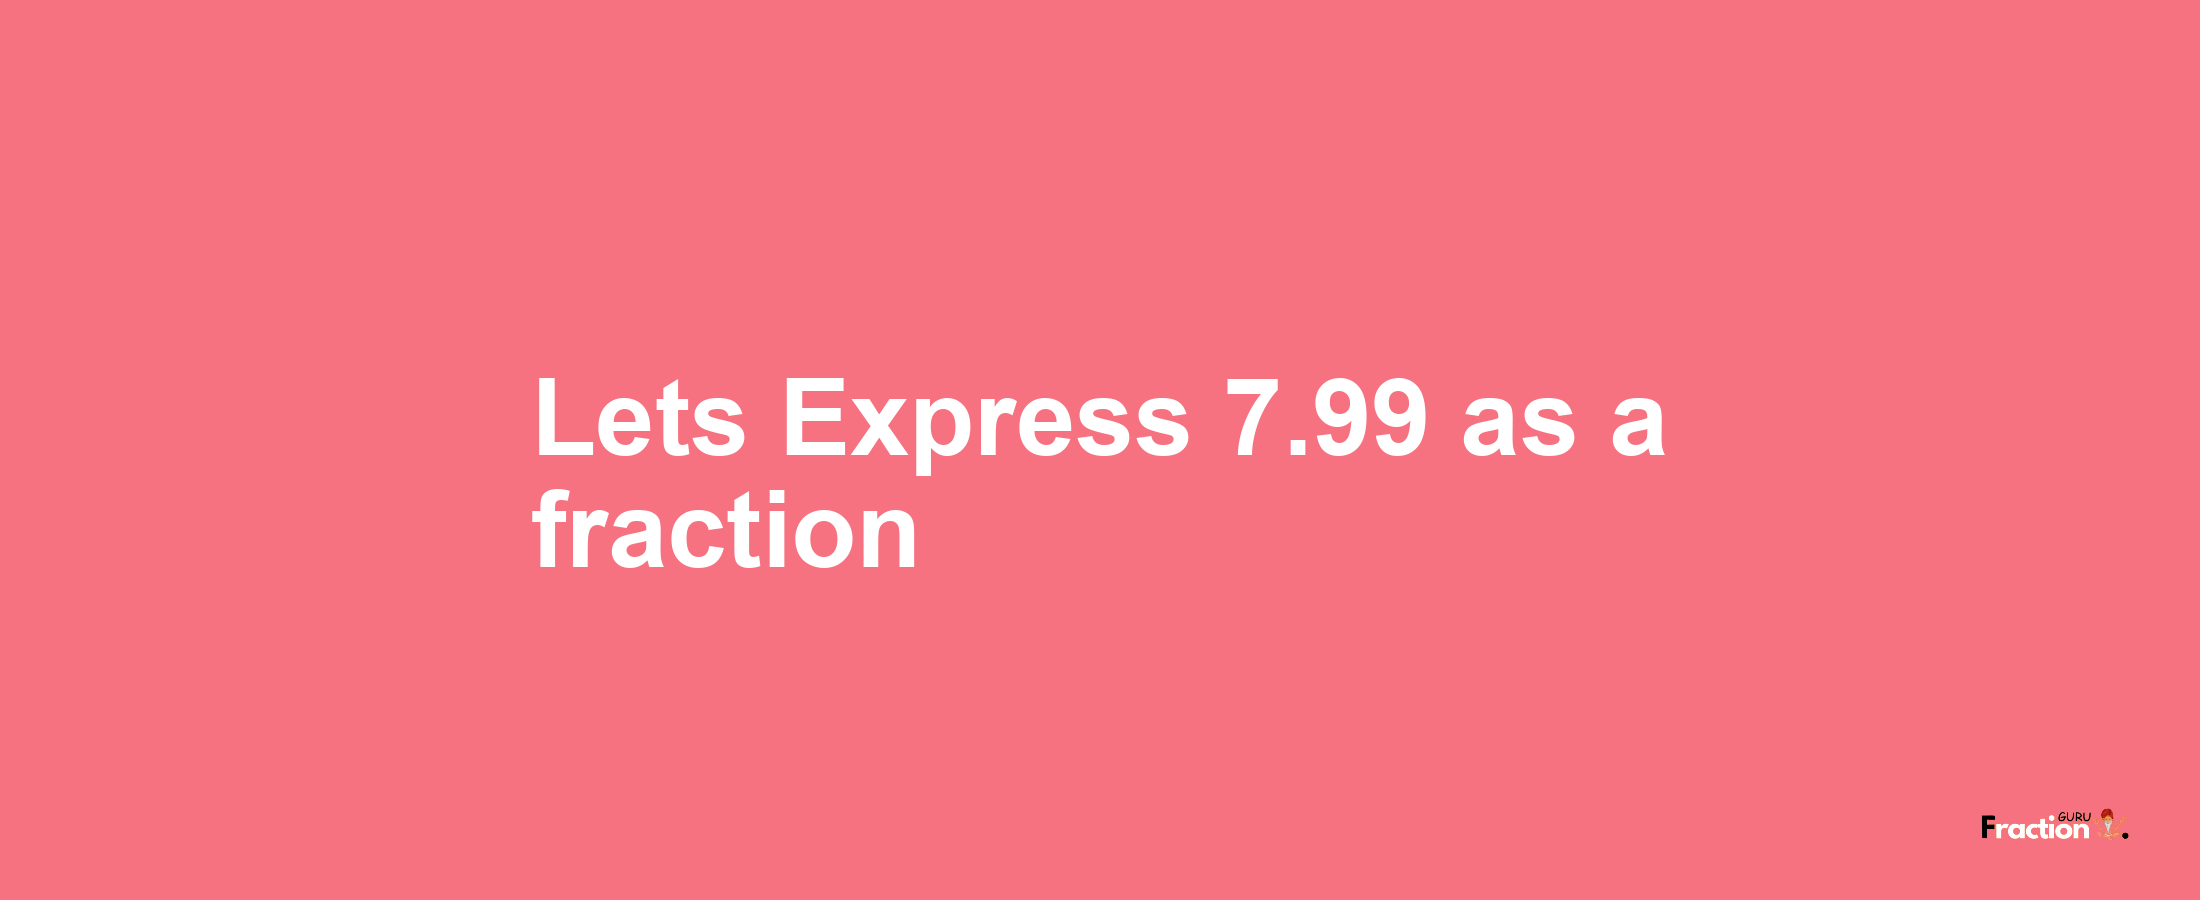 Lets Express 7.99 as afraction